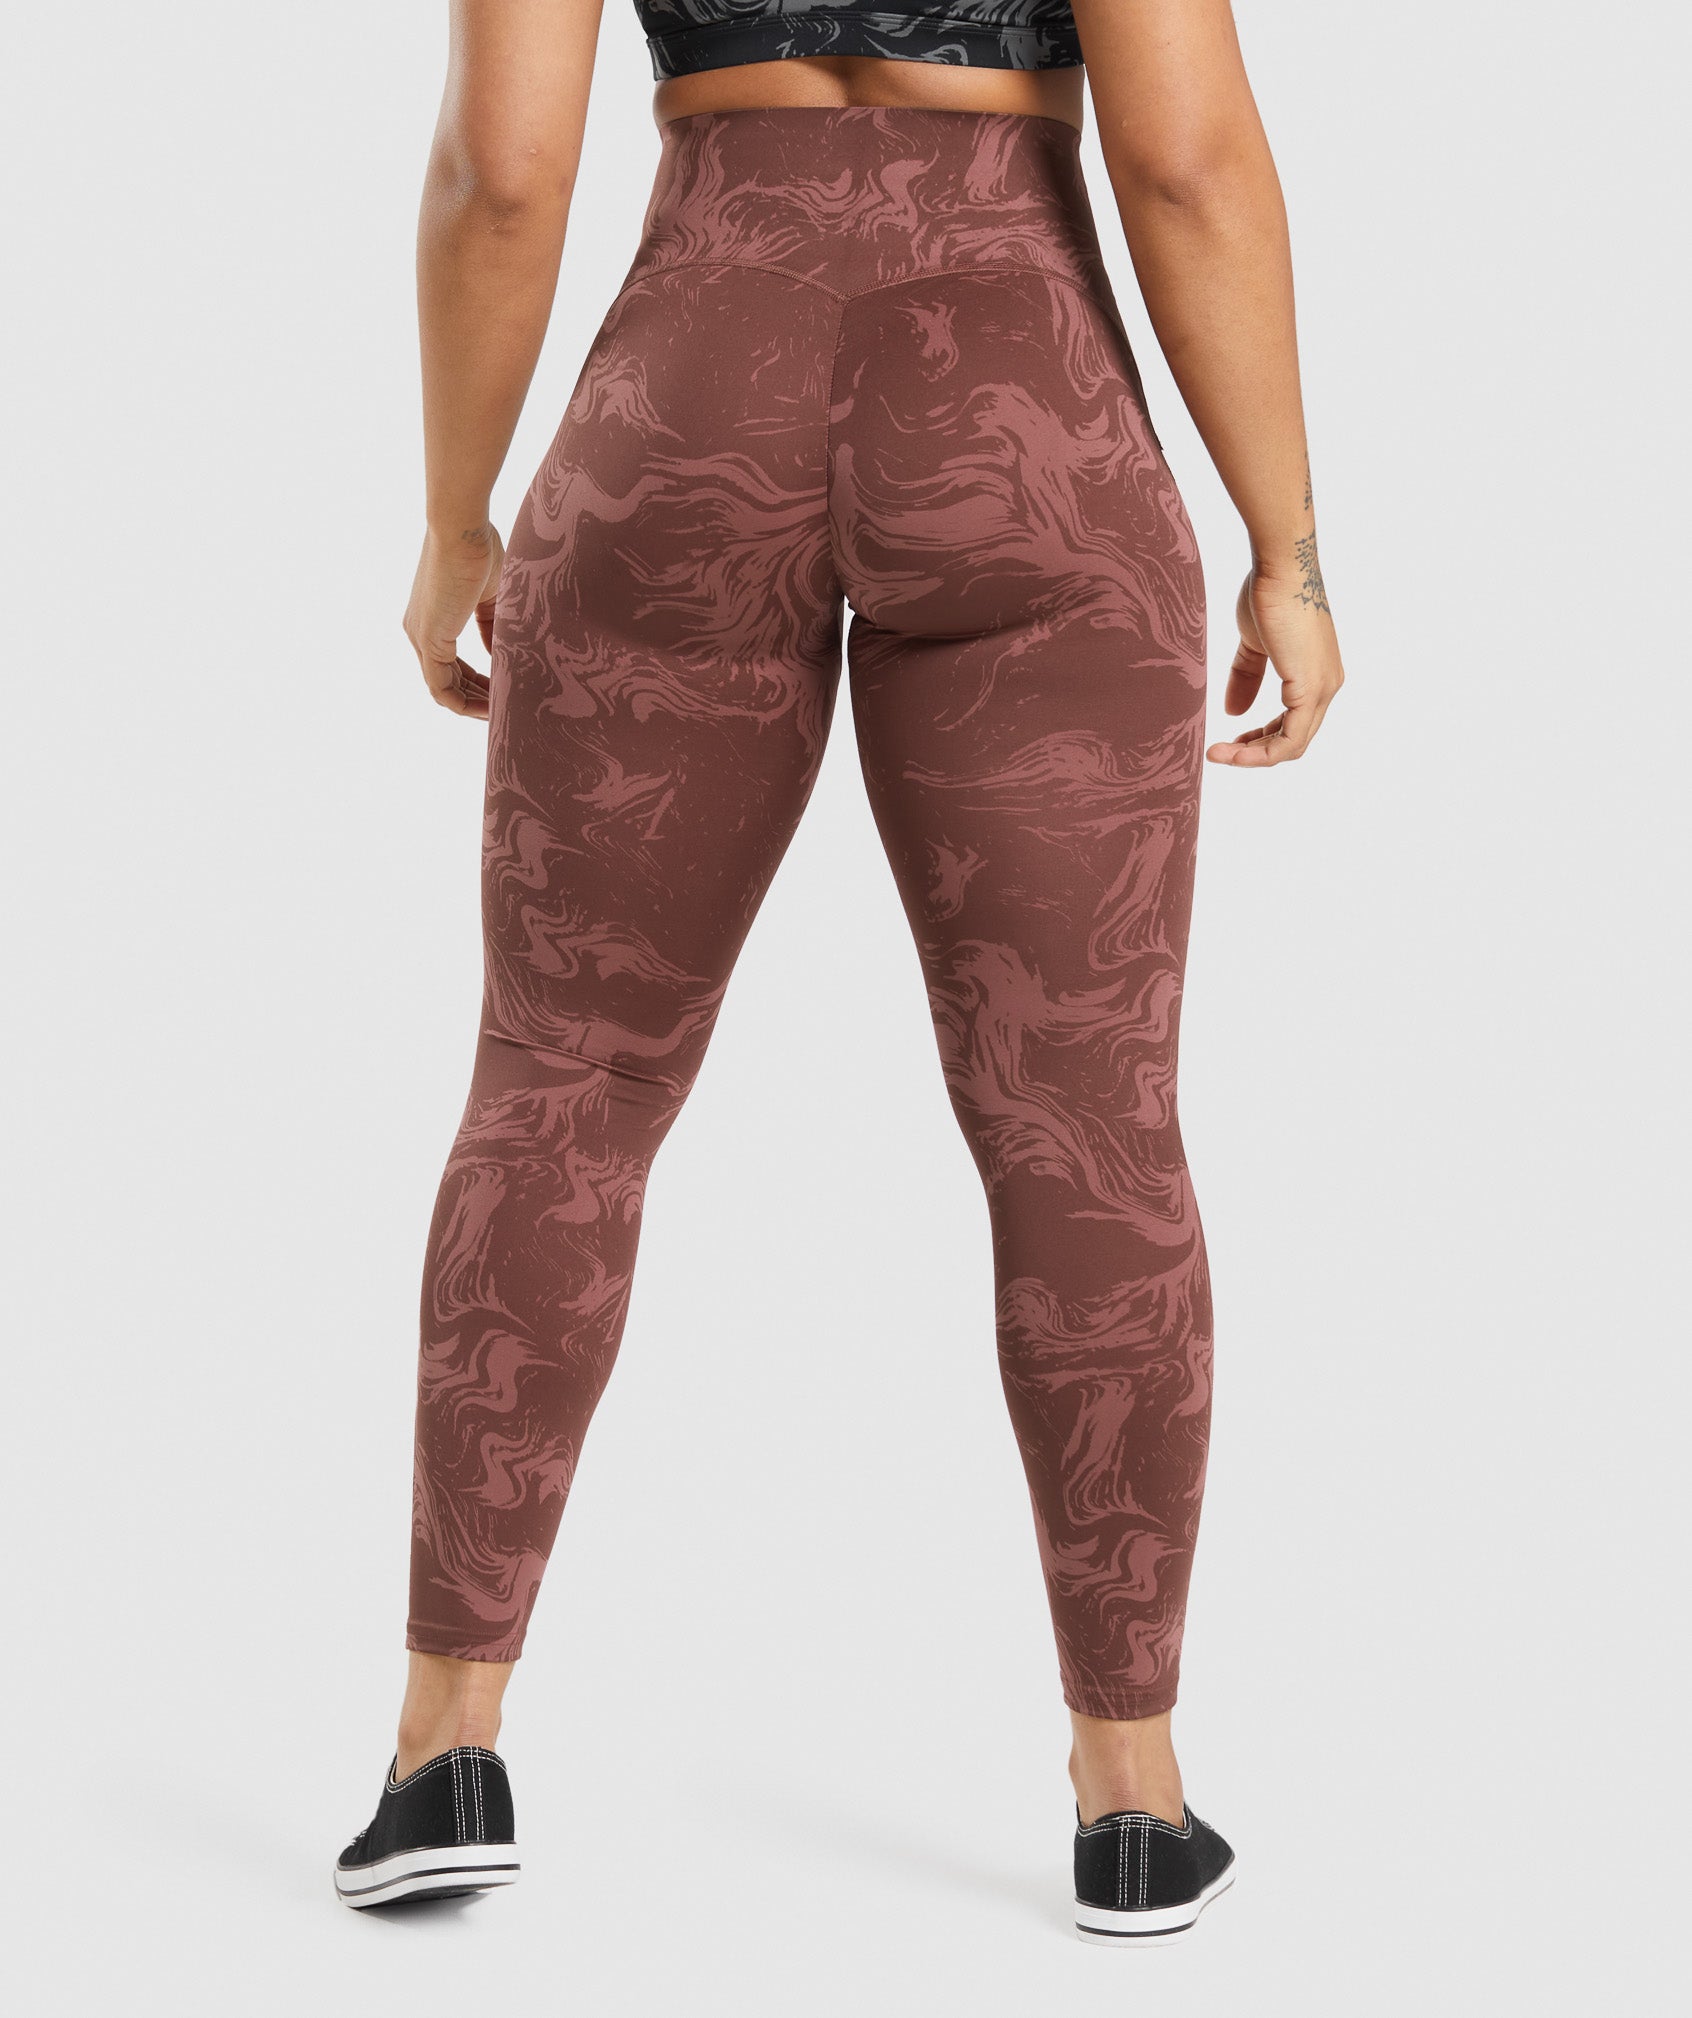 Waist Support Leggings in Cherry Brown Print - view 2